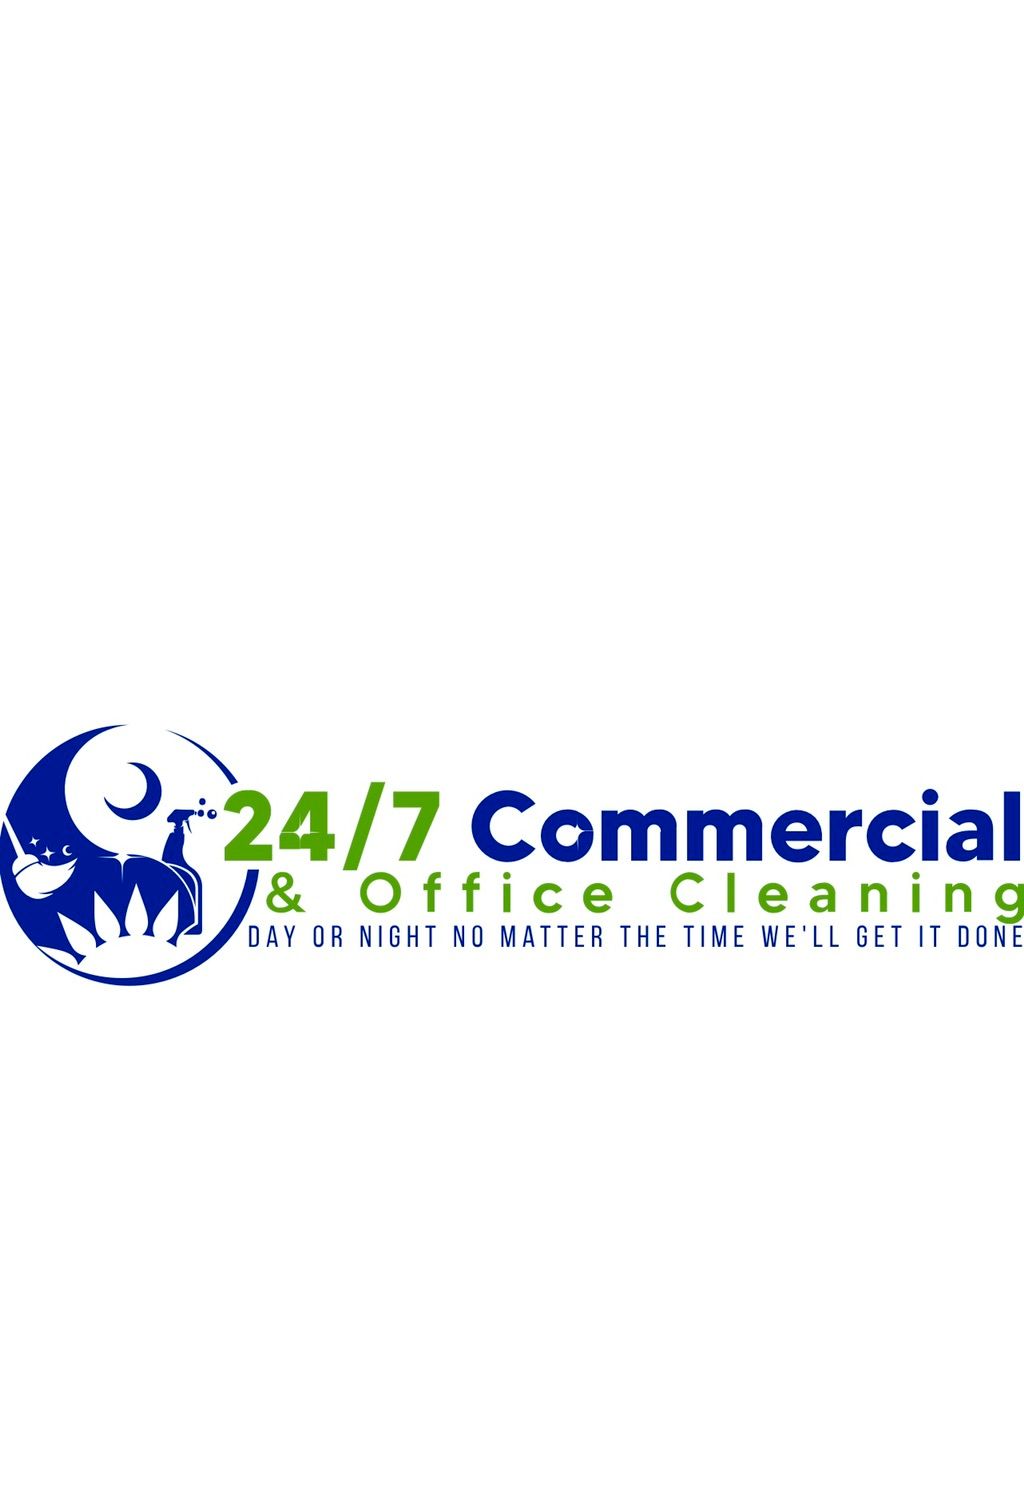 24/7 Commerical and Office Cleaning